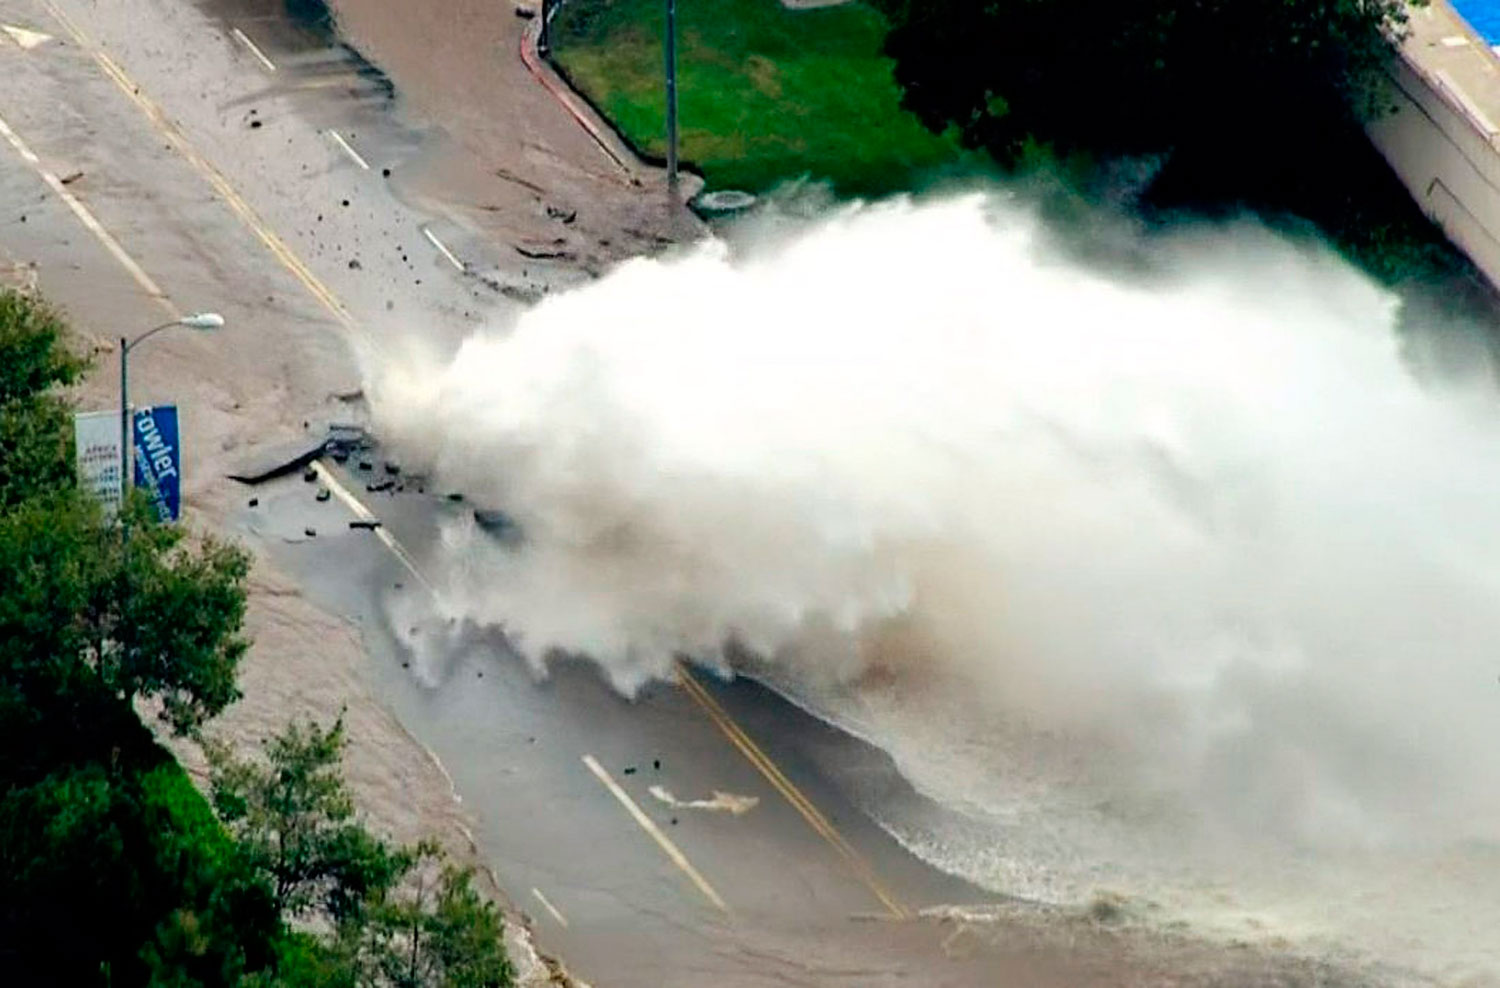 Water gushes from a broken water main on Sunset Boulevard on the UCLA campus in Los Angeles July 29, 2014 in this still image from aerial video from NBCLA.com. (NBCLA.com/Reuters)